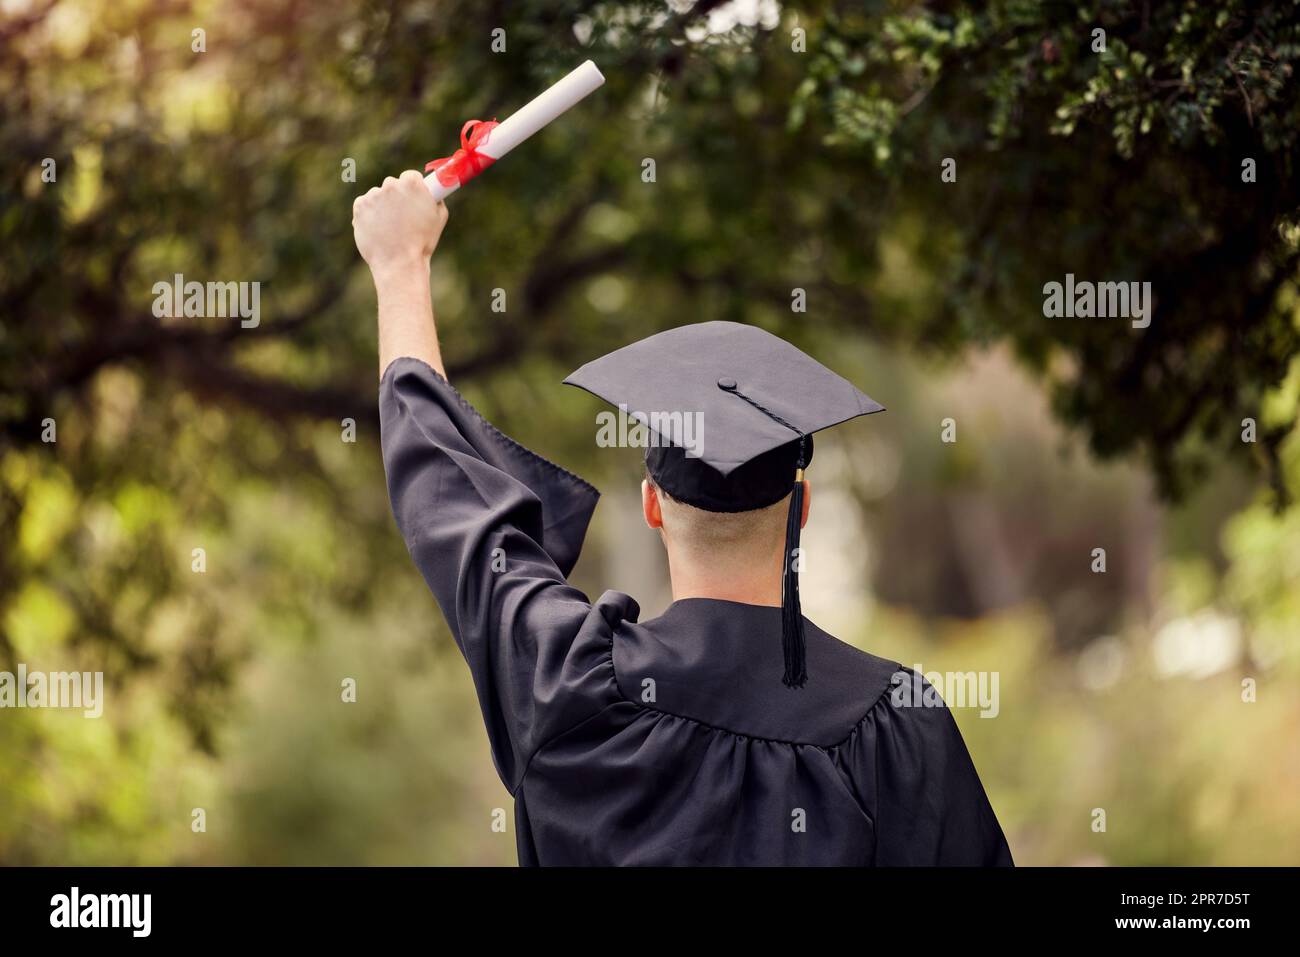 It can only get better from here on. Rearview shot of a young man cheering on graduation day. Stock Photo